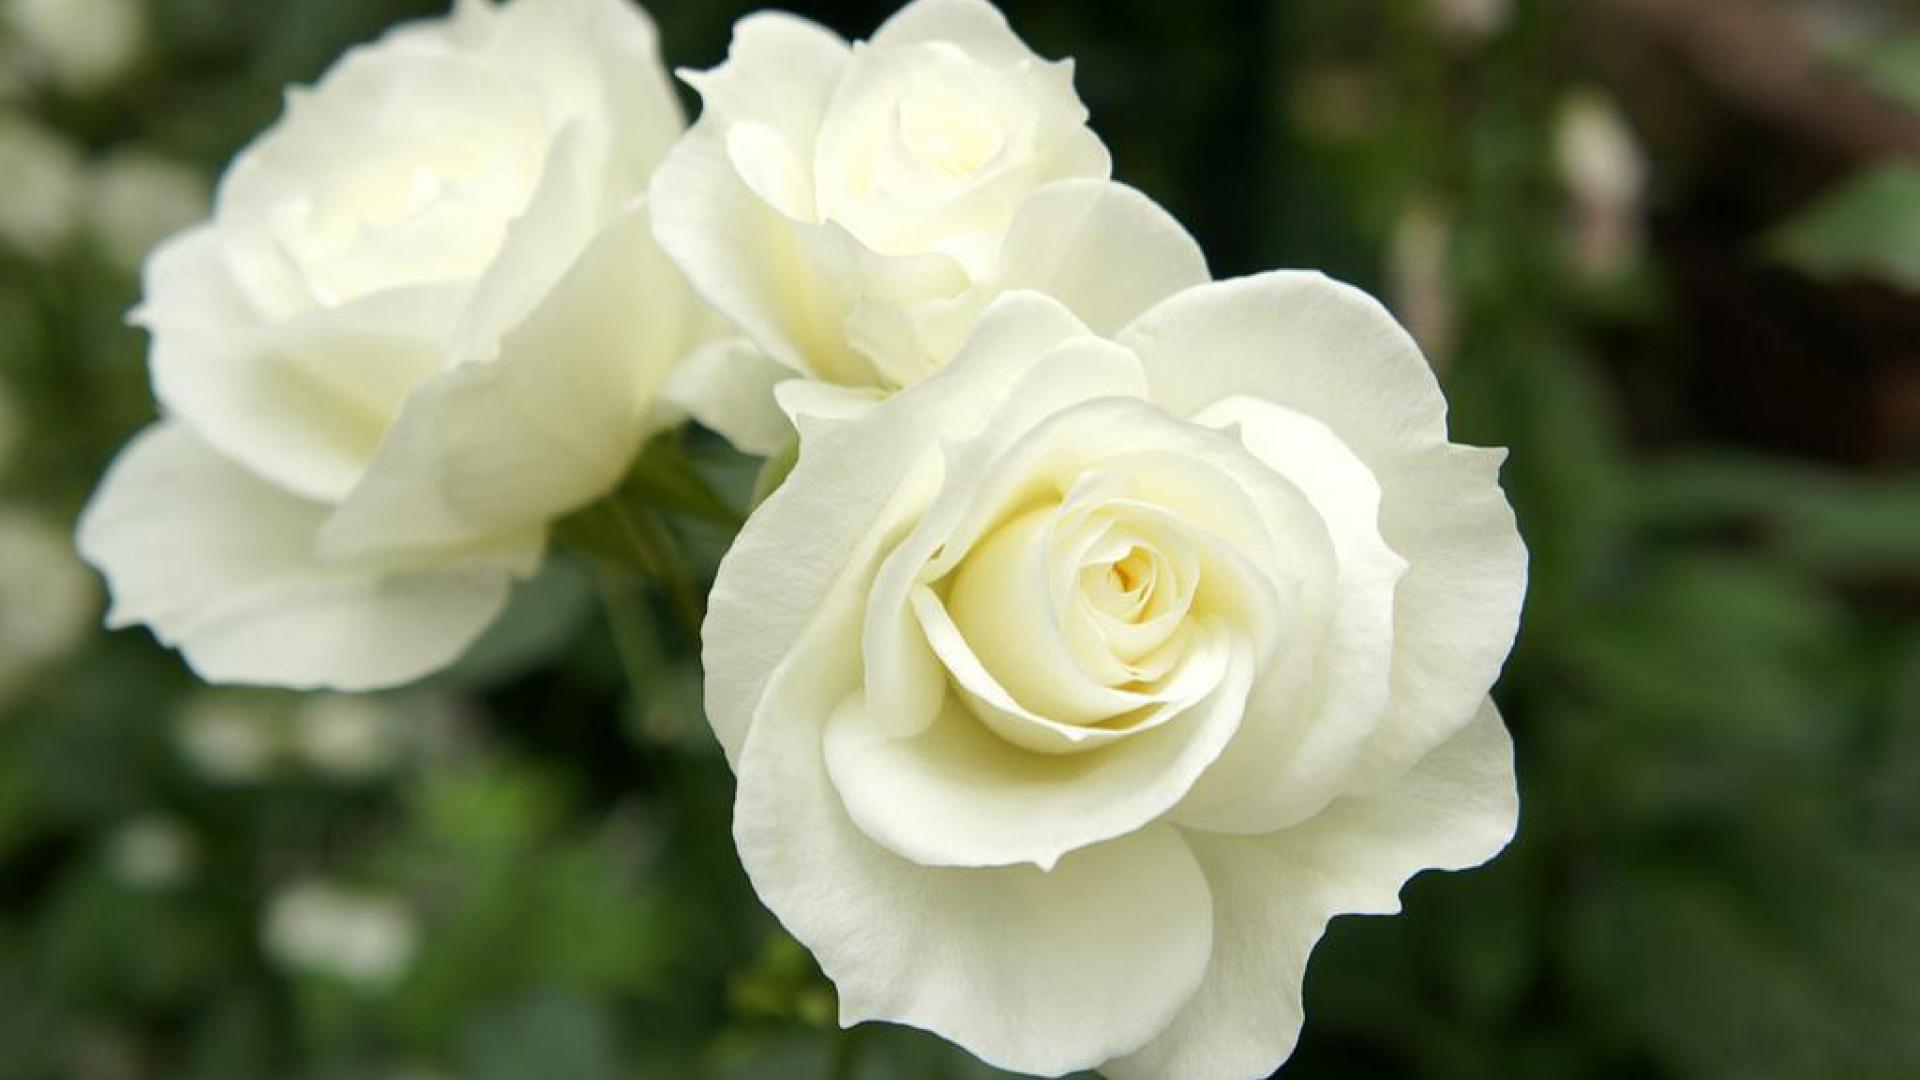 Beautiful White Flowers Images : Top 25 Most Beautiful White Flowers ...